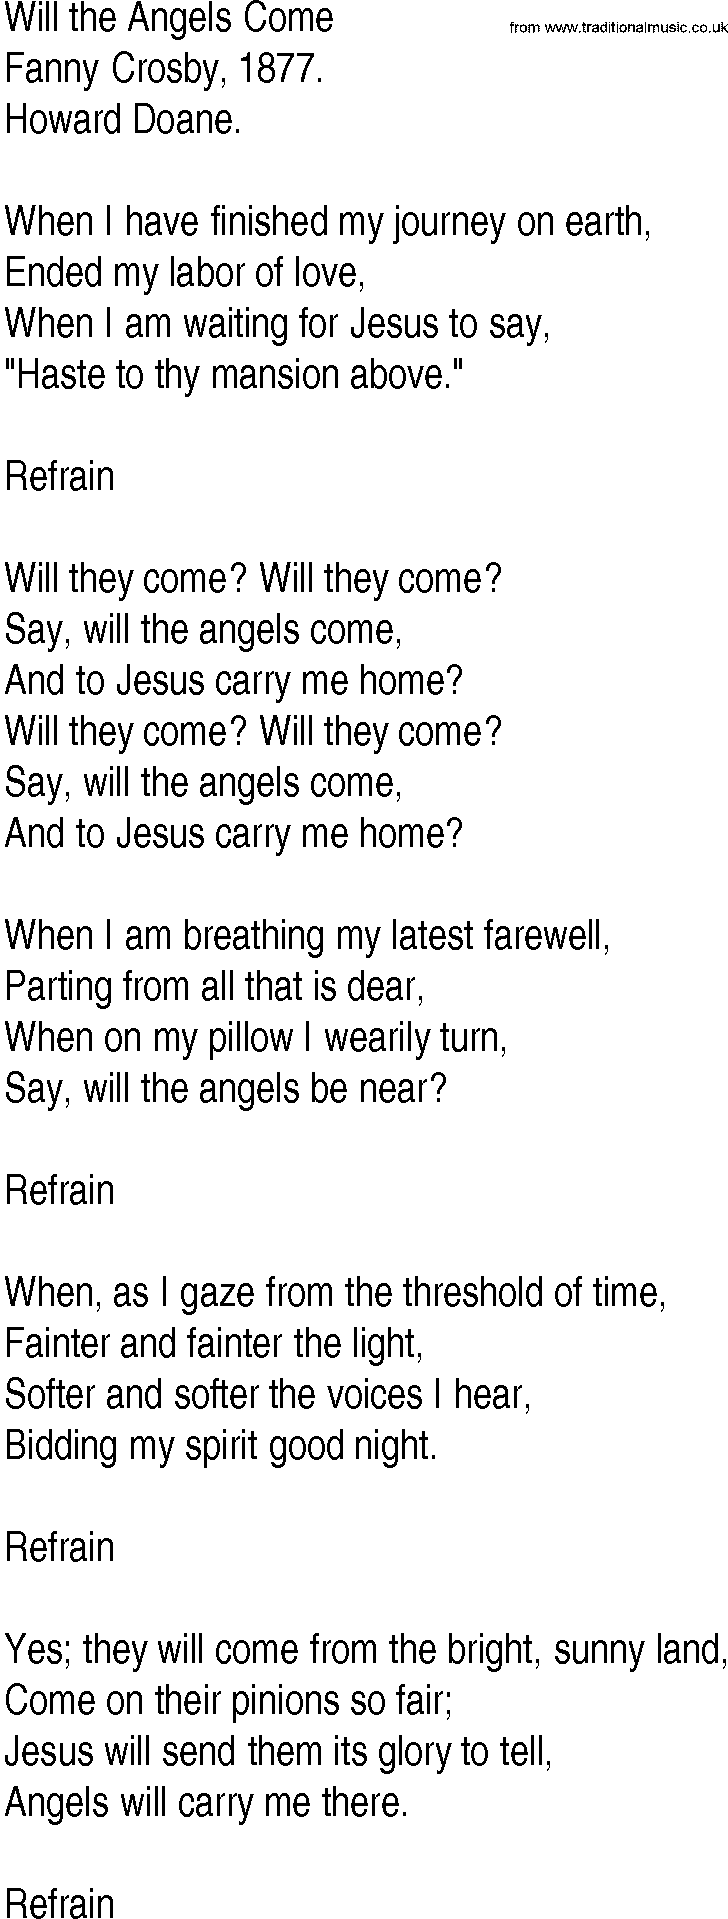 Hymn and Gospel Song: Will the Angels Come by Fanny Crosby lyrics